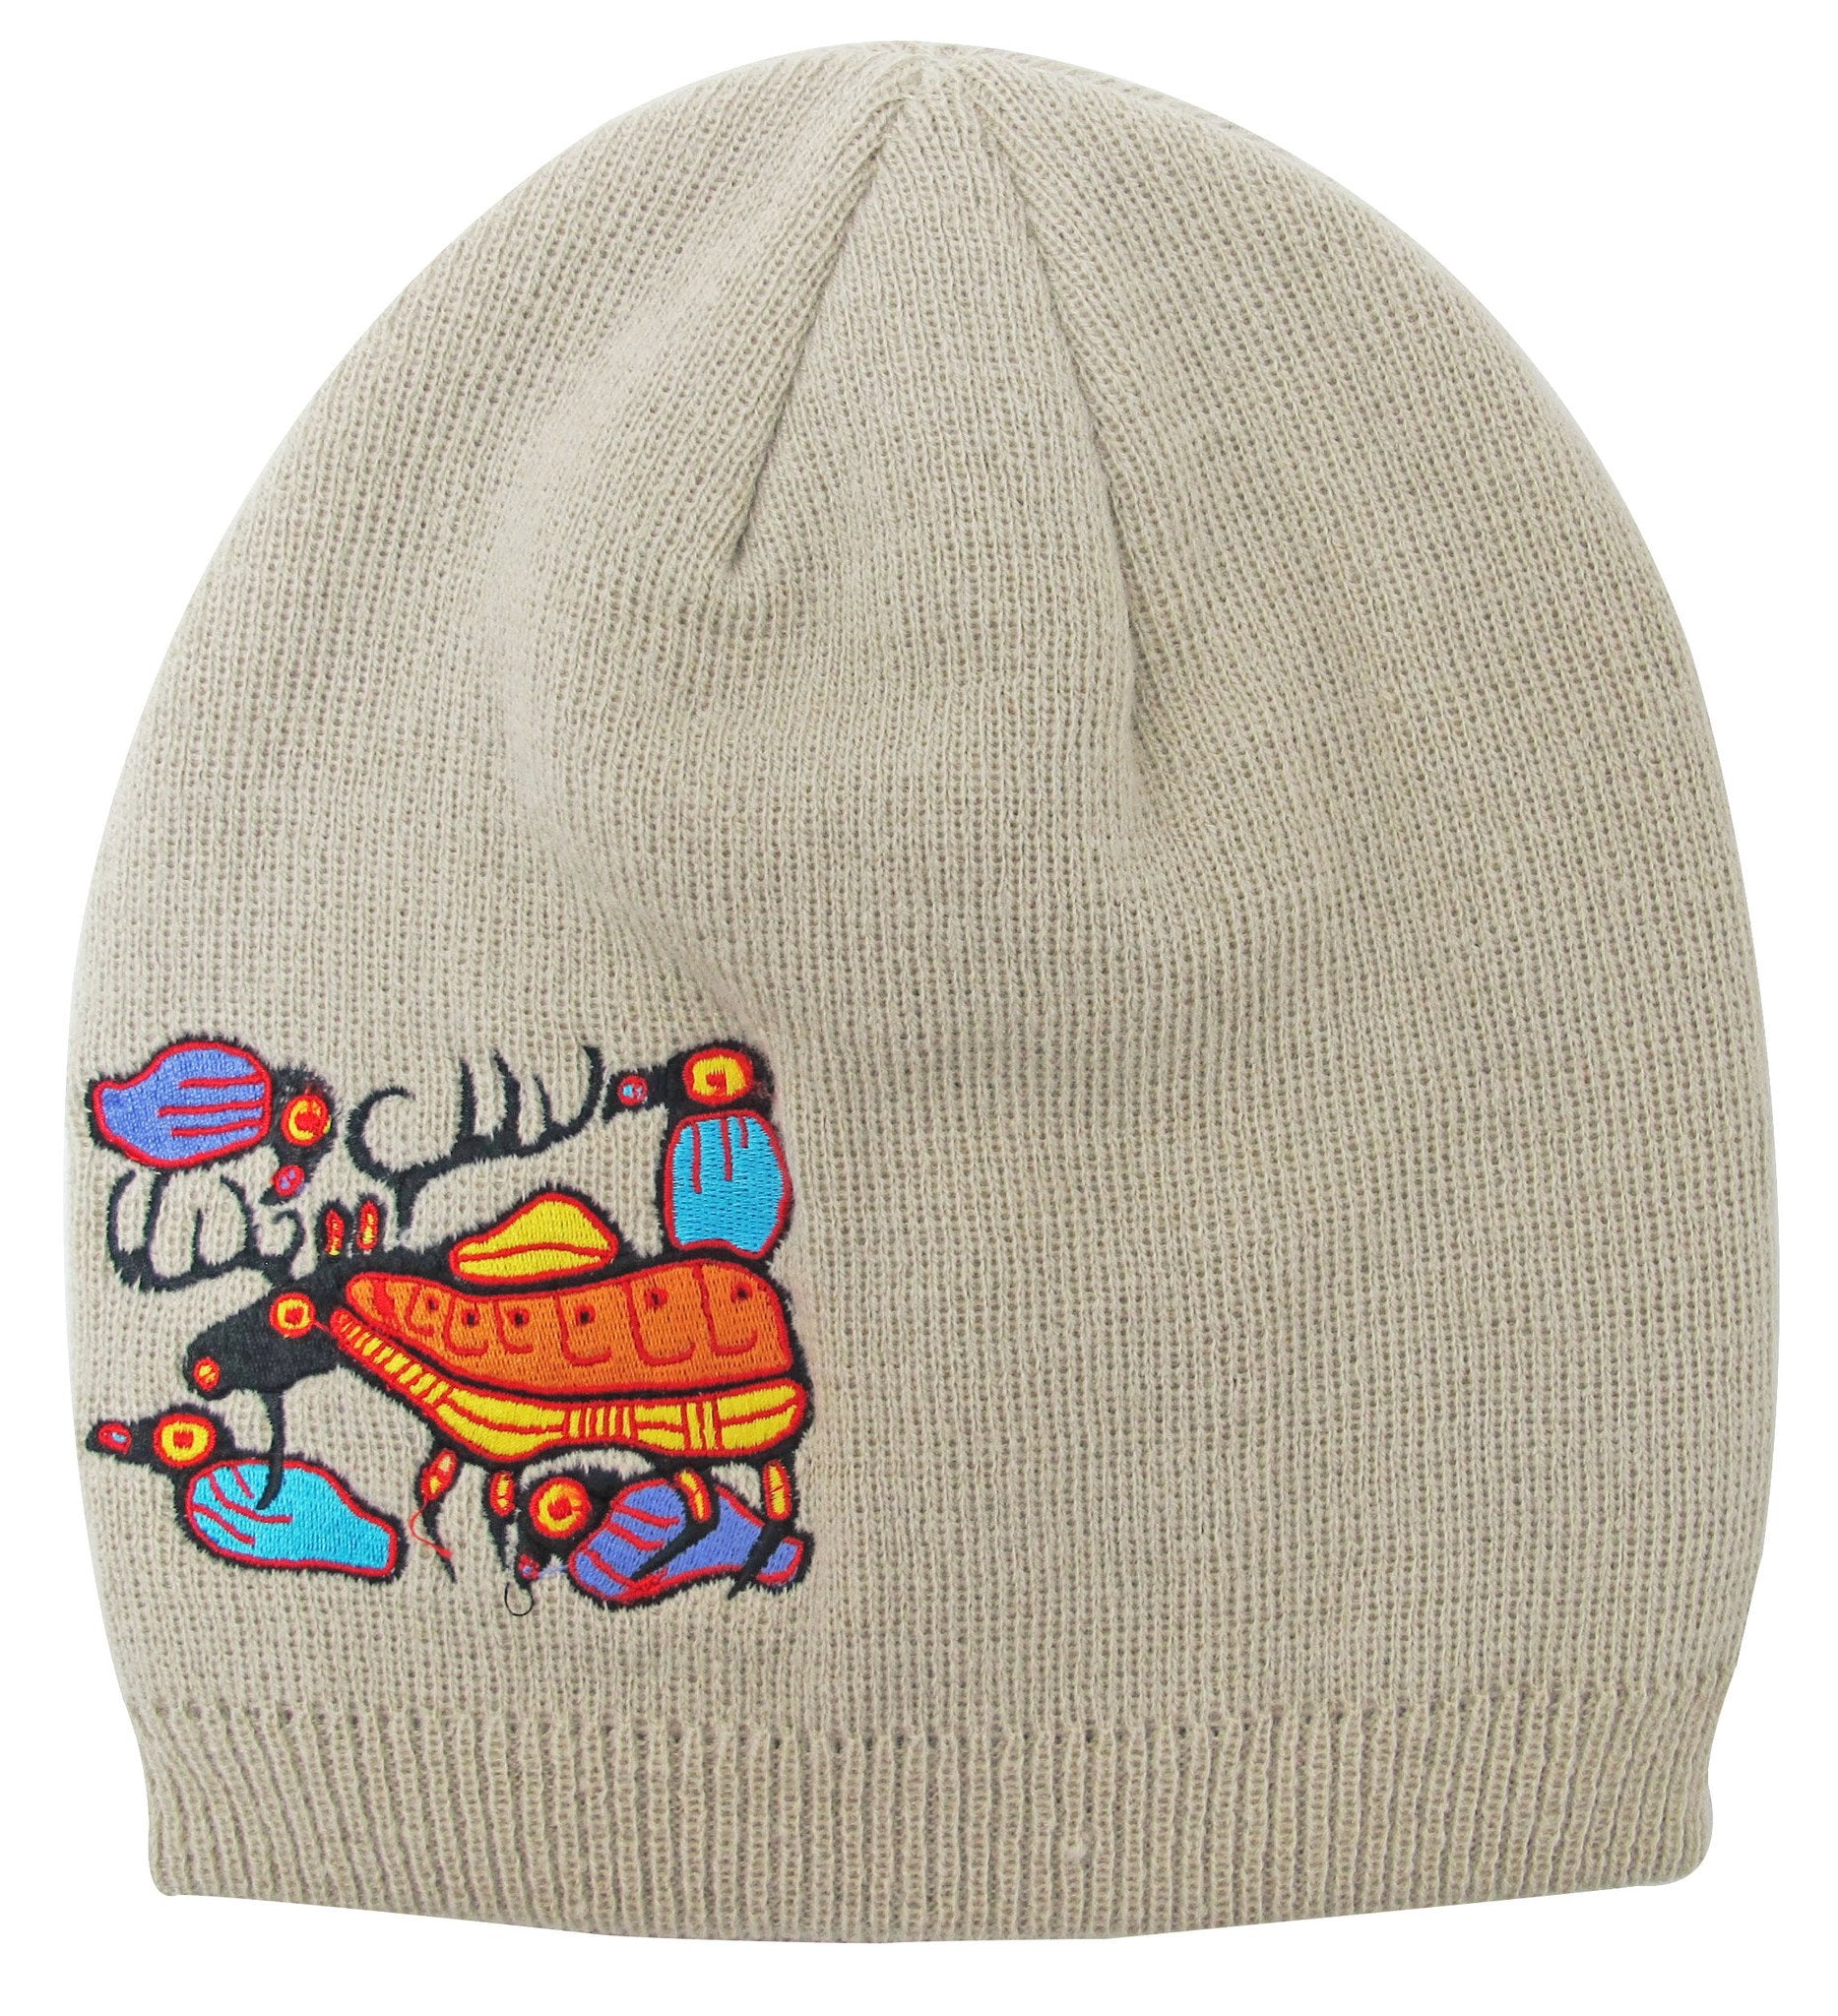 Norval Morrisseau Moose Harmony Embroidered Knitted Hat — Oscardo